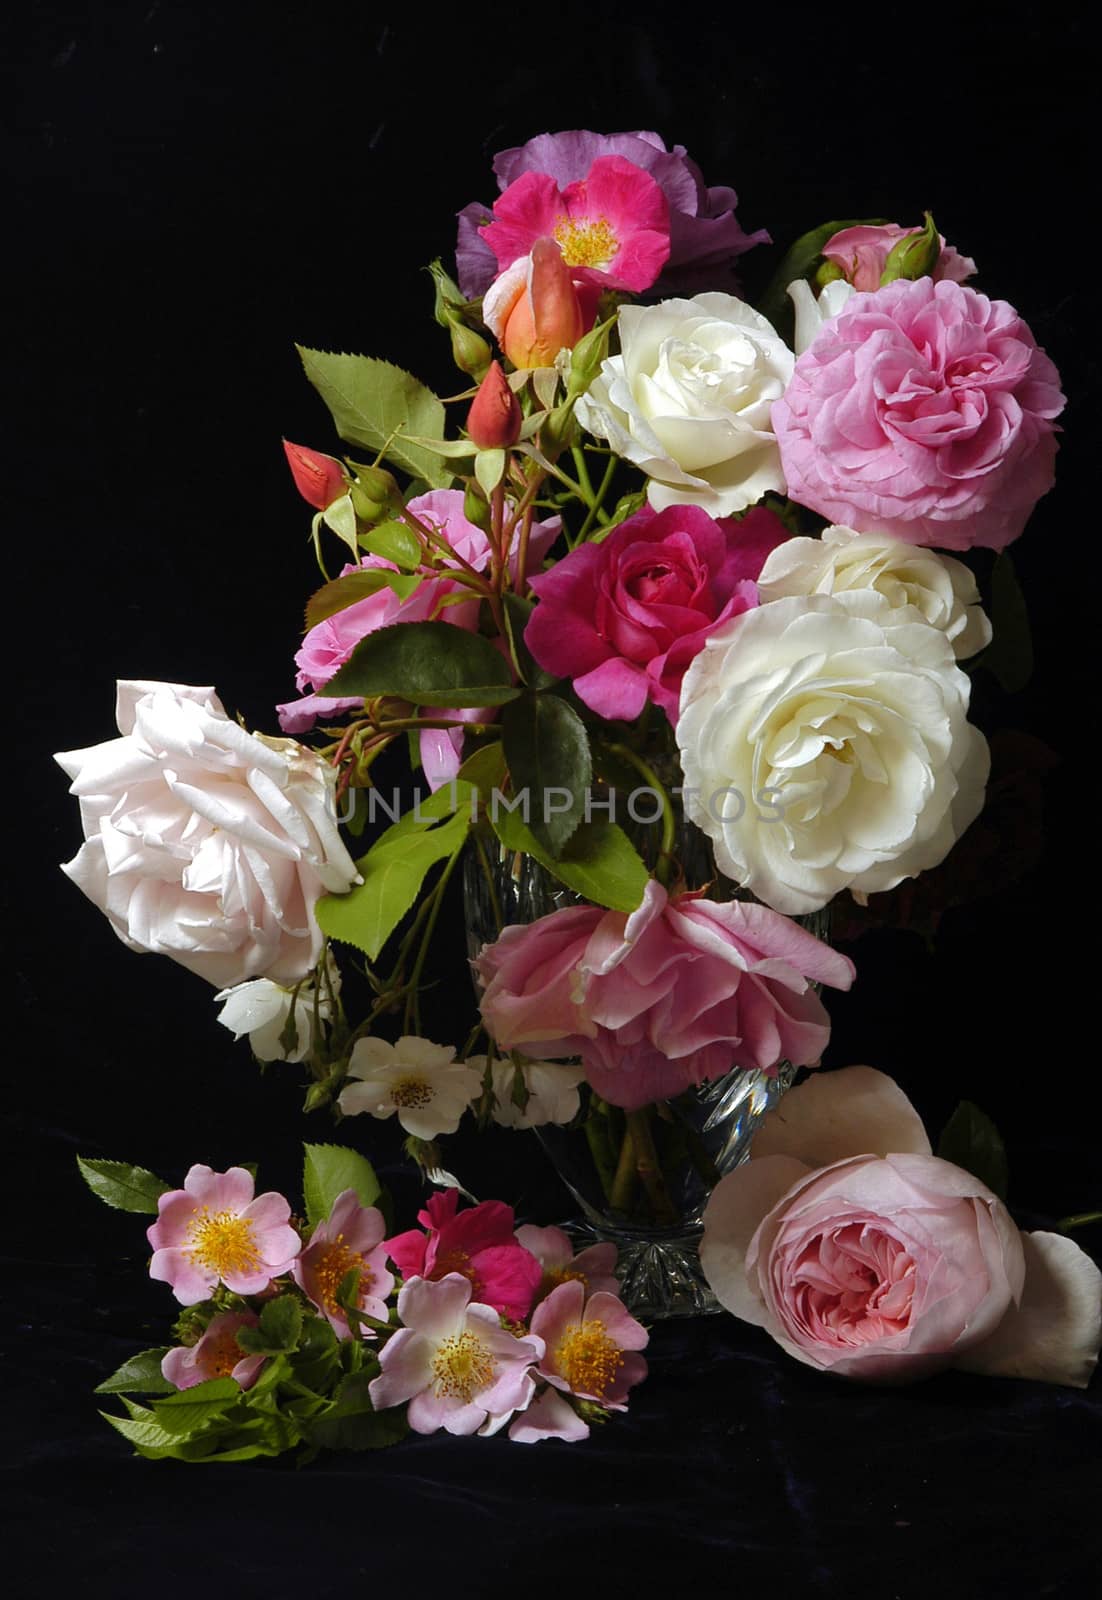 Roses in classic arrangements. by george_stevenson